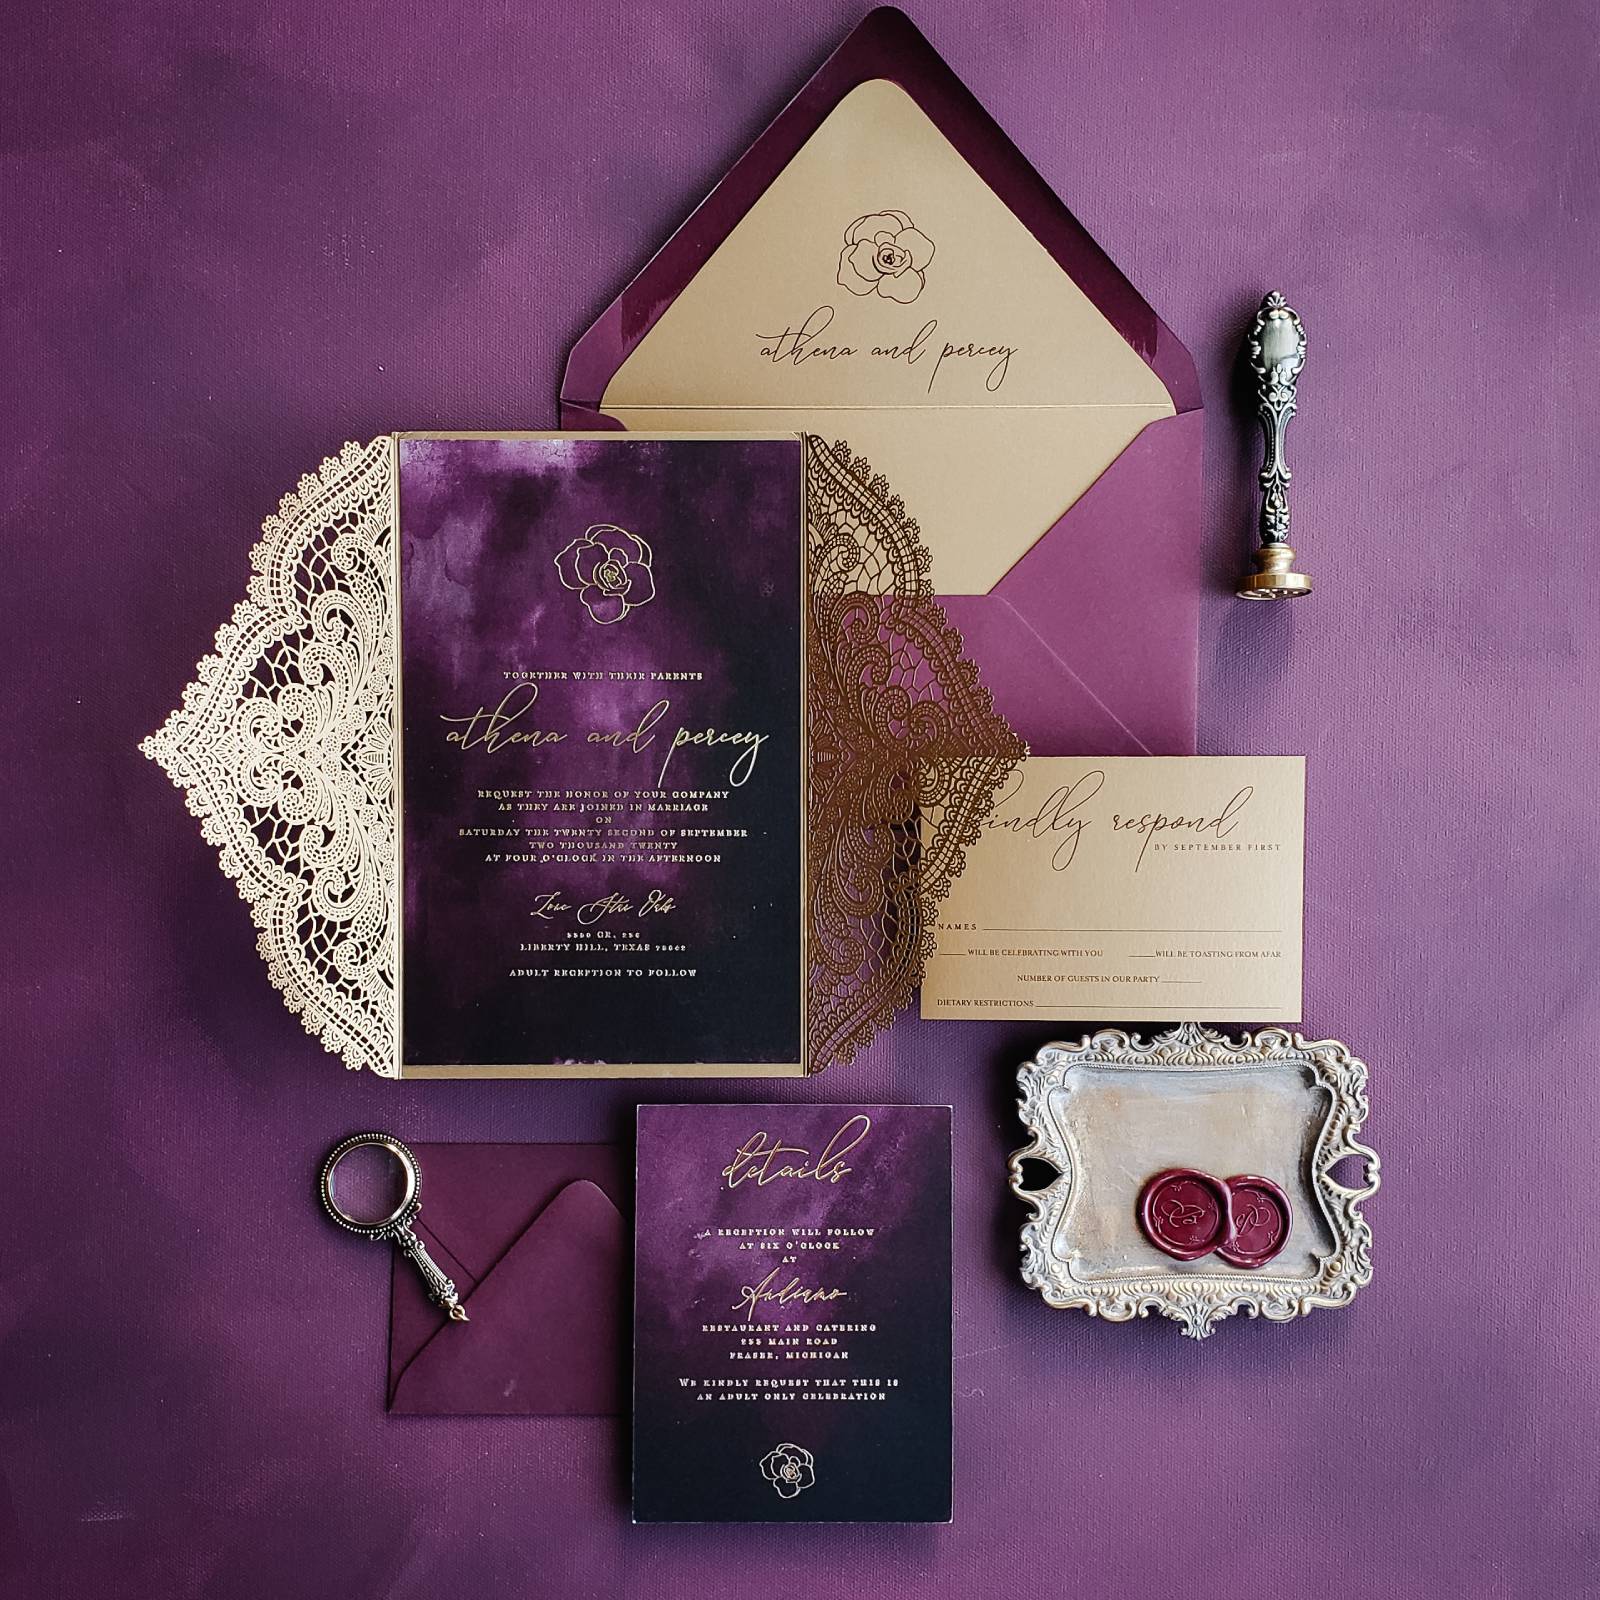 [vc_row][vc_column][vc_column_text]Purchase this listing to get a sample of our Budapest wedding invitation suite.

The sample includes:

• 5.5